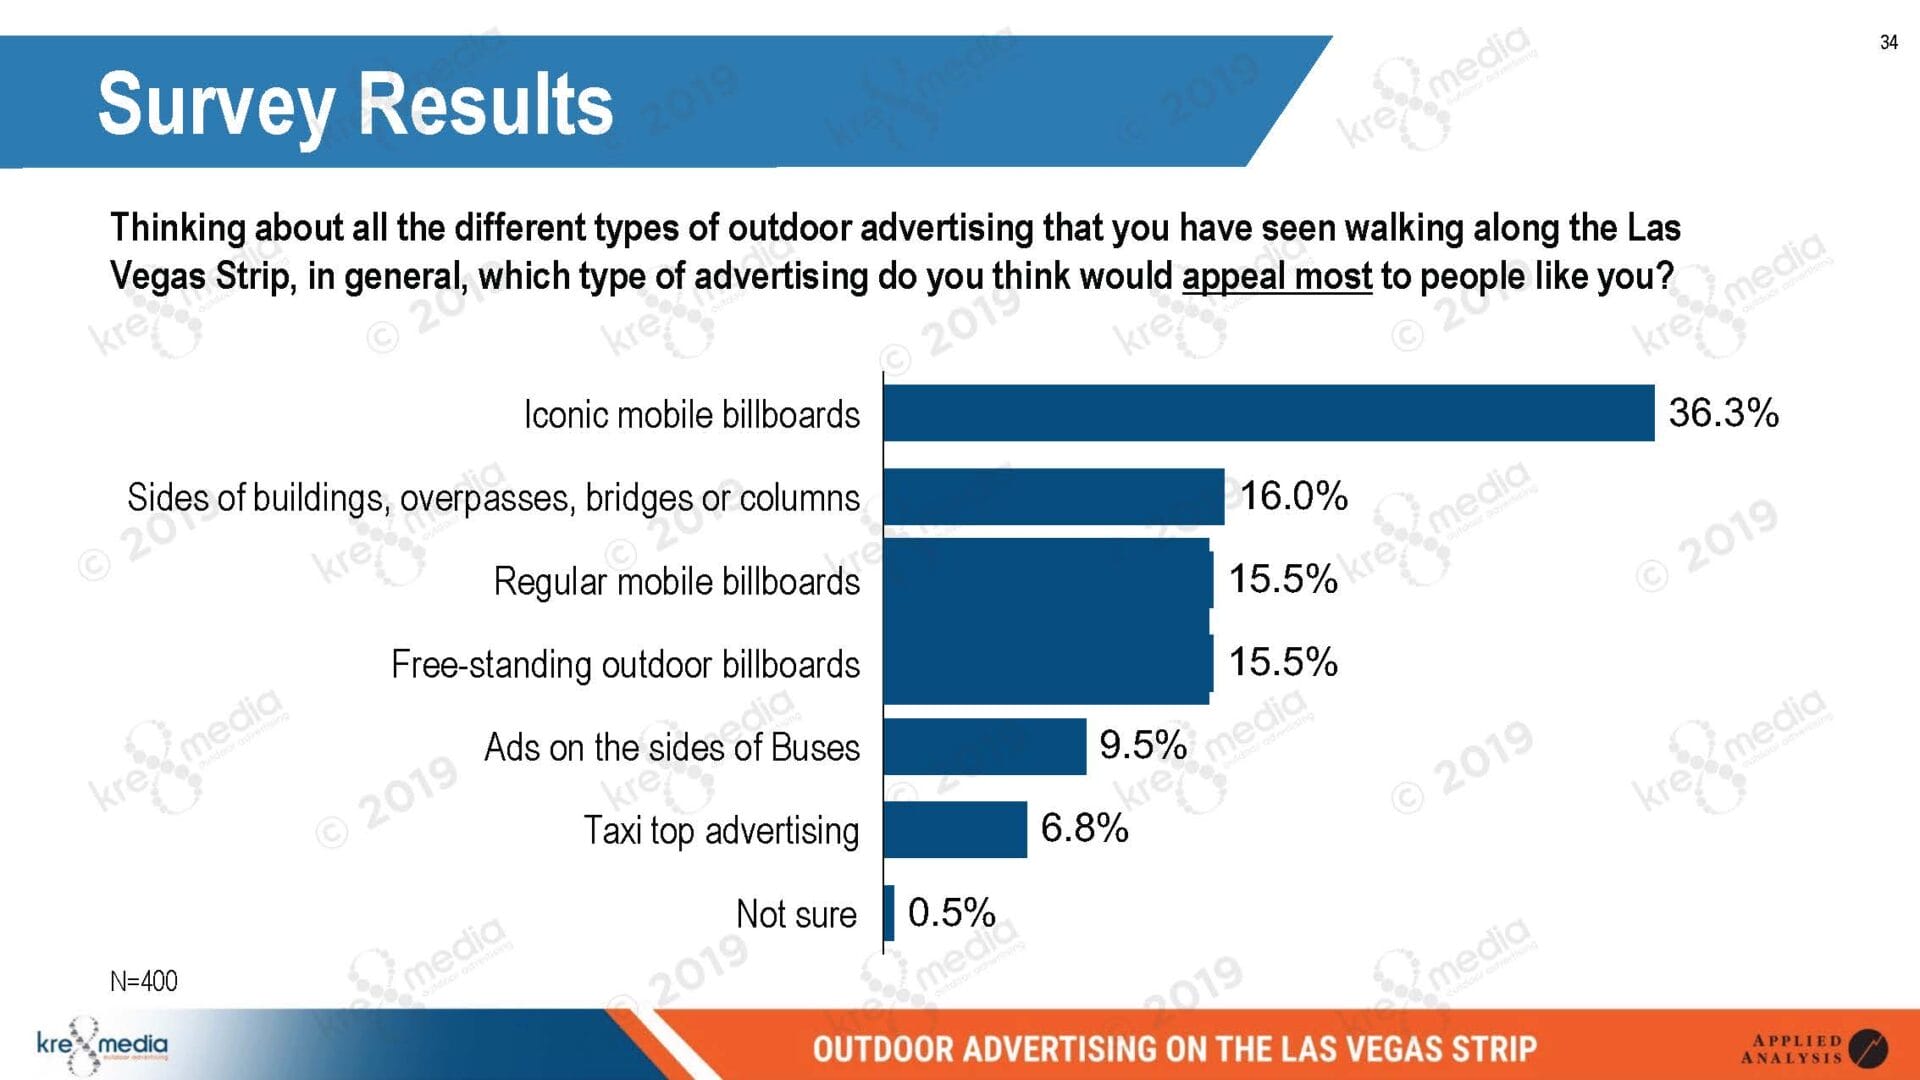 Chart showing preferred outdoor advertising types on Las Vegas Strip.